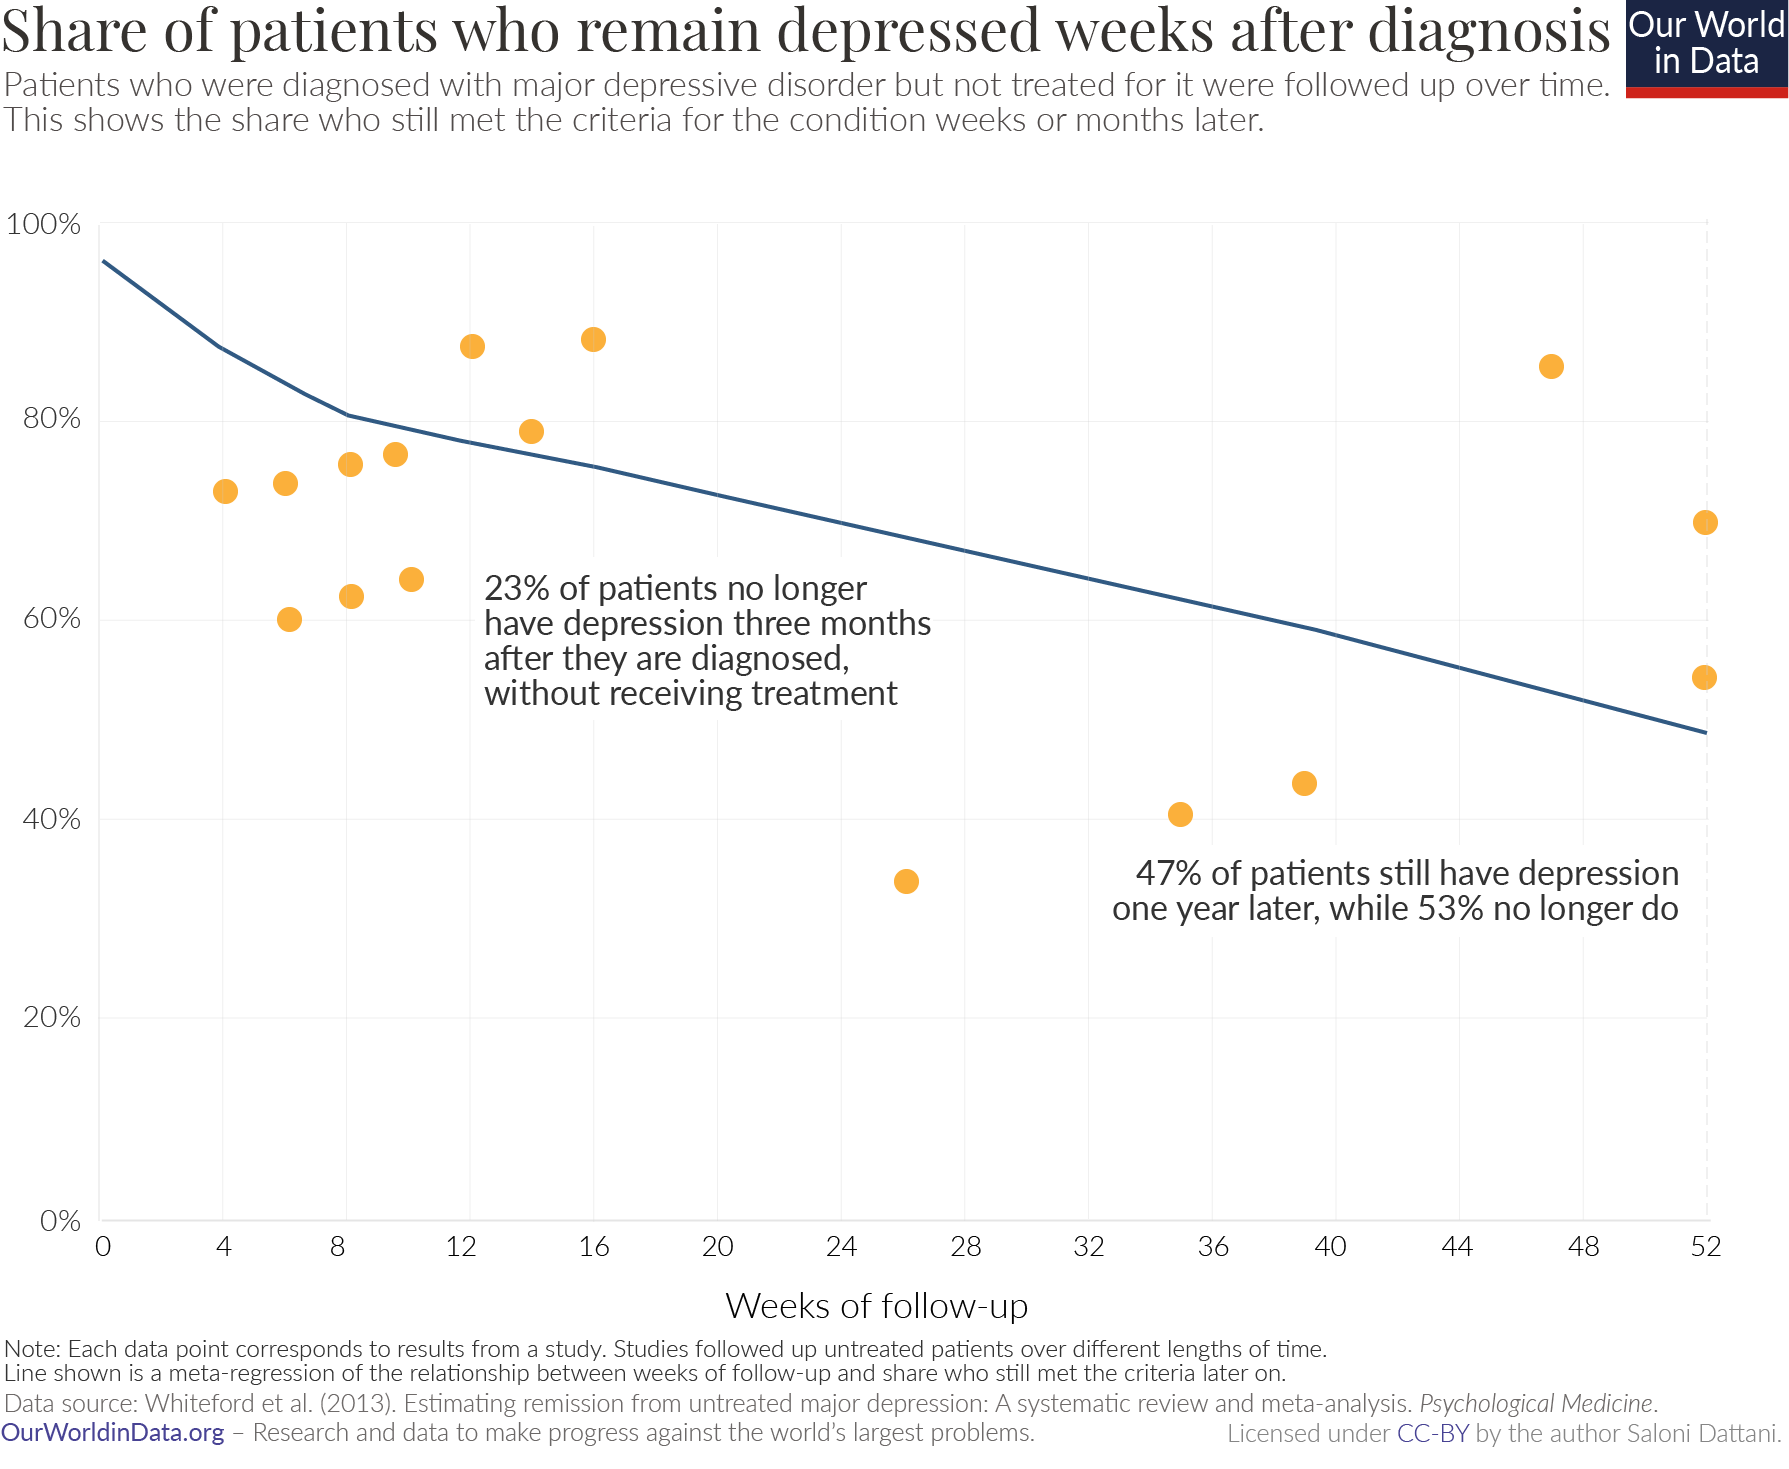 Share of patients who remain depressed weeks after diagnosis. Chart showing the decline of patients who were diagnosed with major depressive disorder and still met the criteria for the condition weeks or months later, among those who were not treated for it.